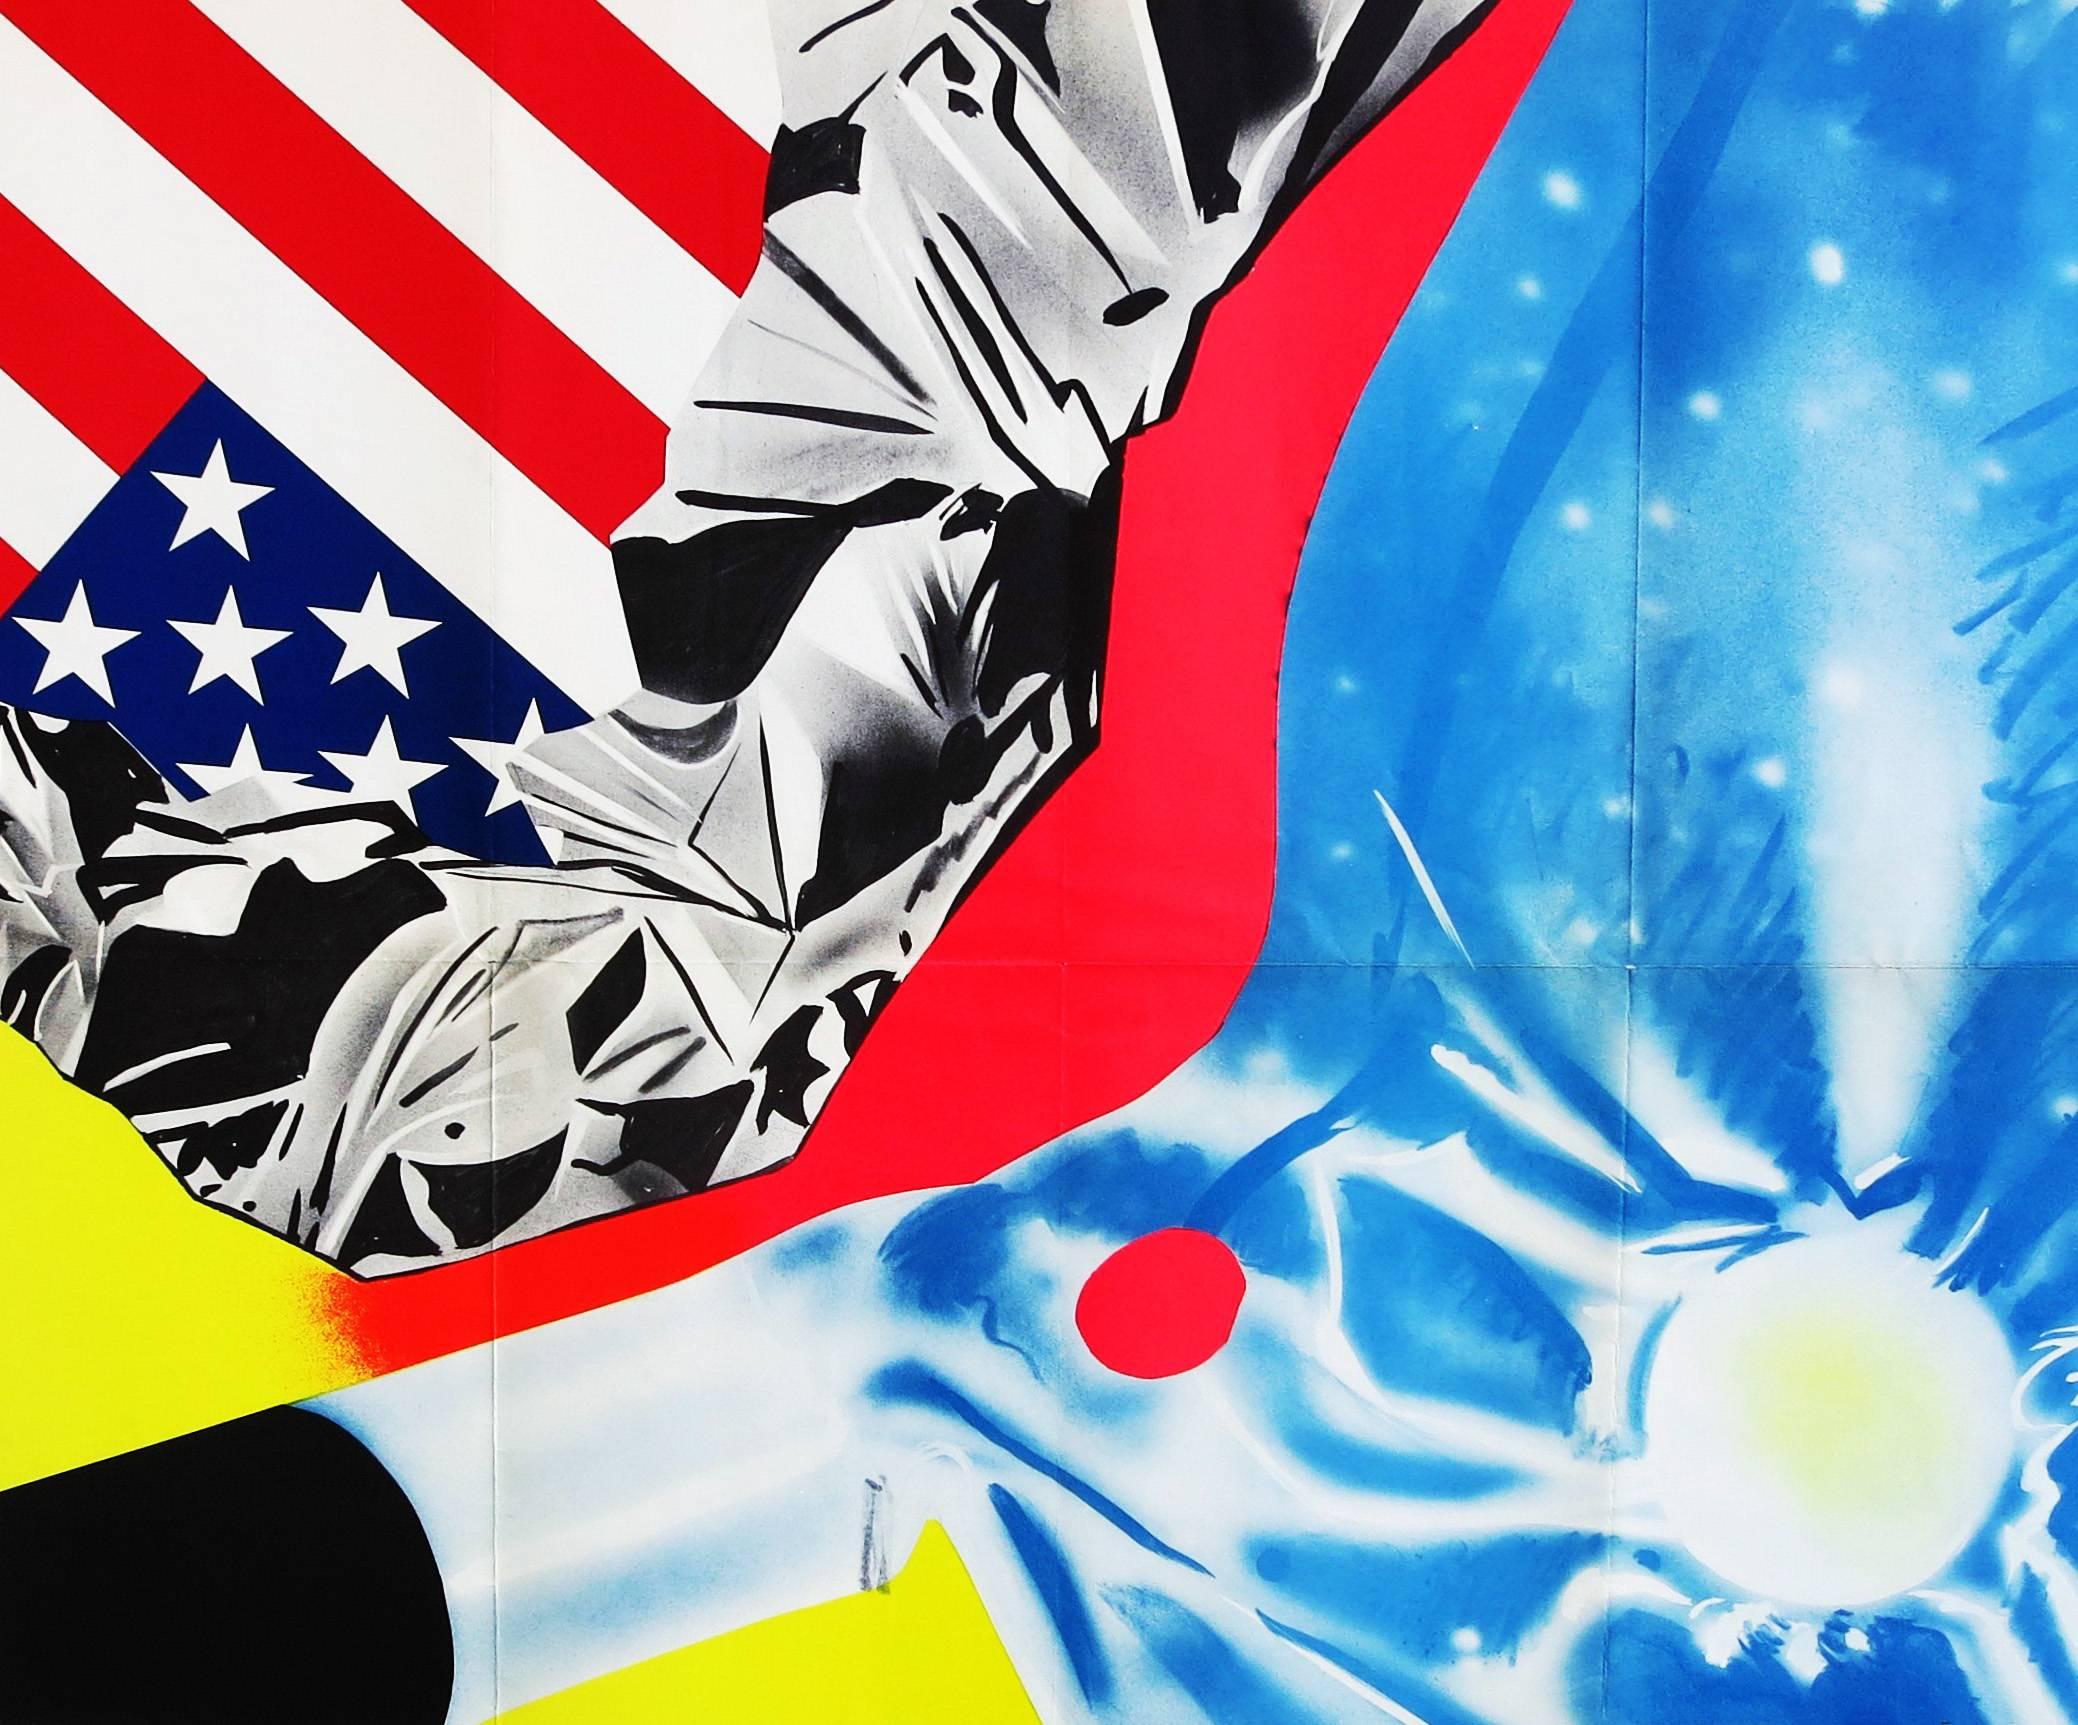 James Rosenquist announcement poster (Leo Castelli early 1970s) - Art by (after) James Rosenquist